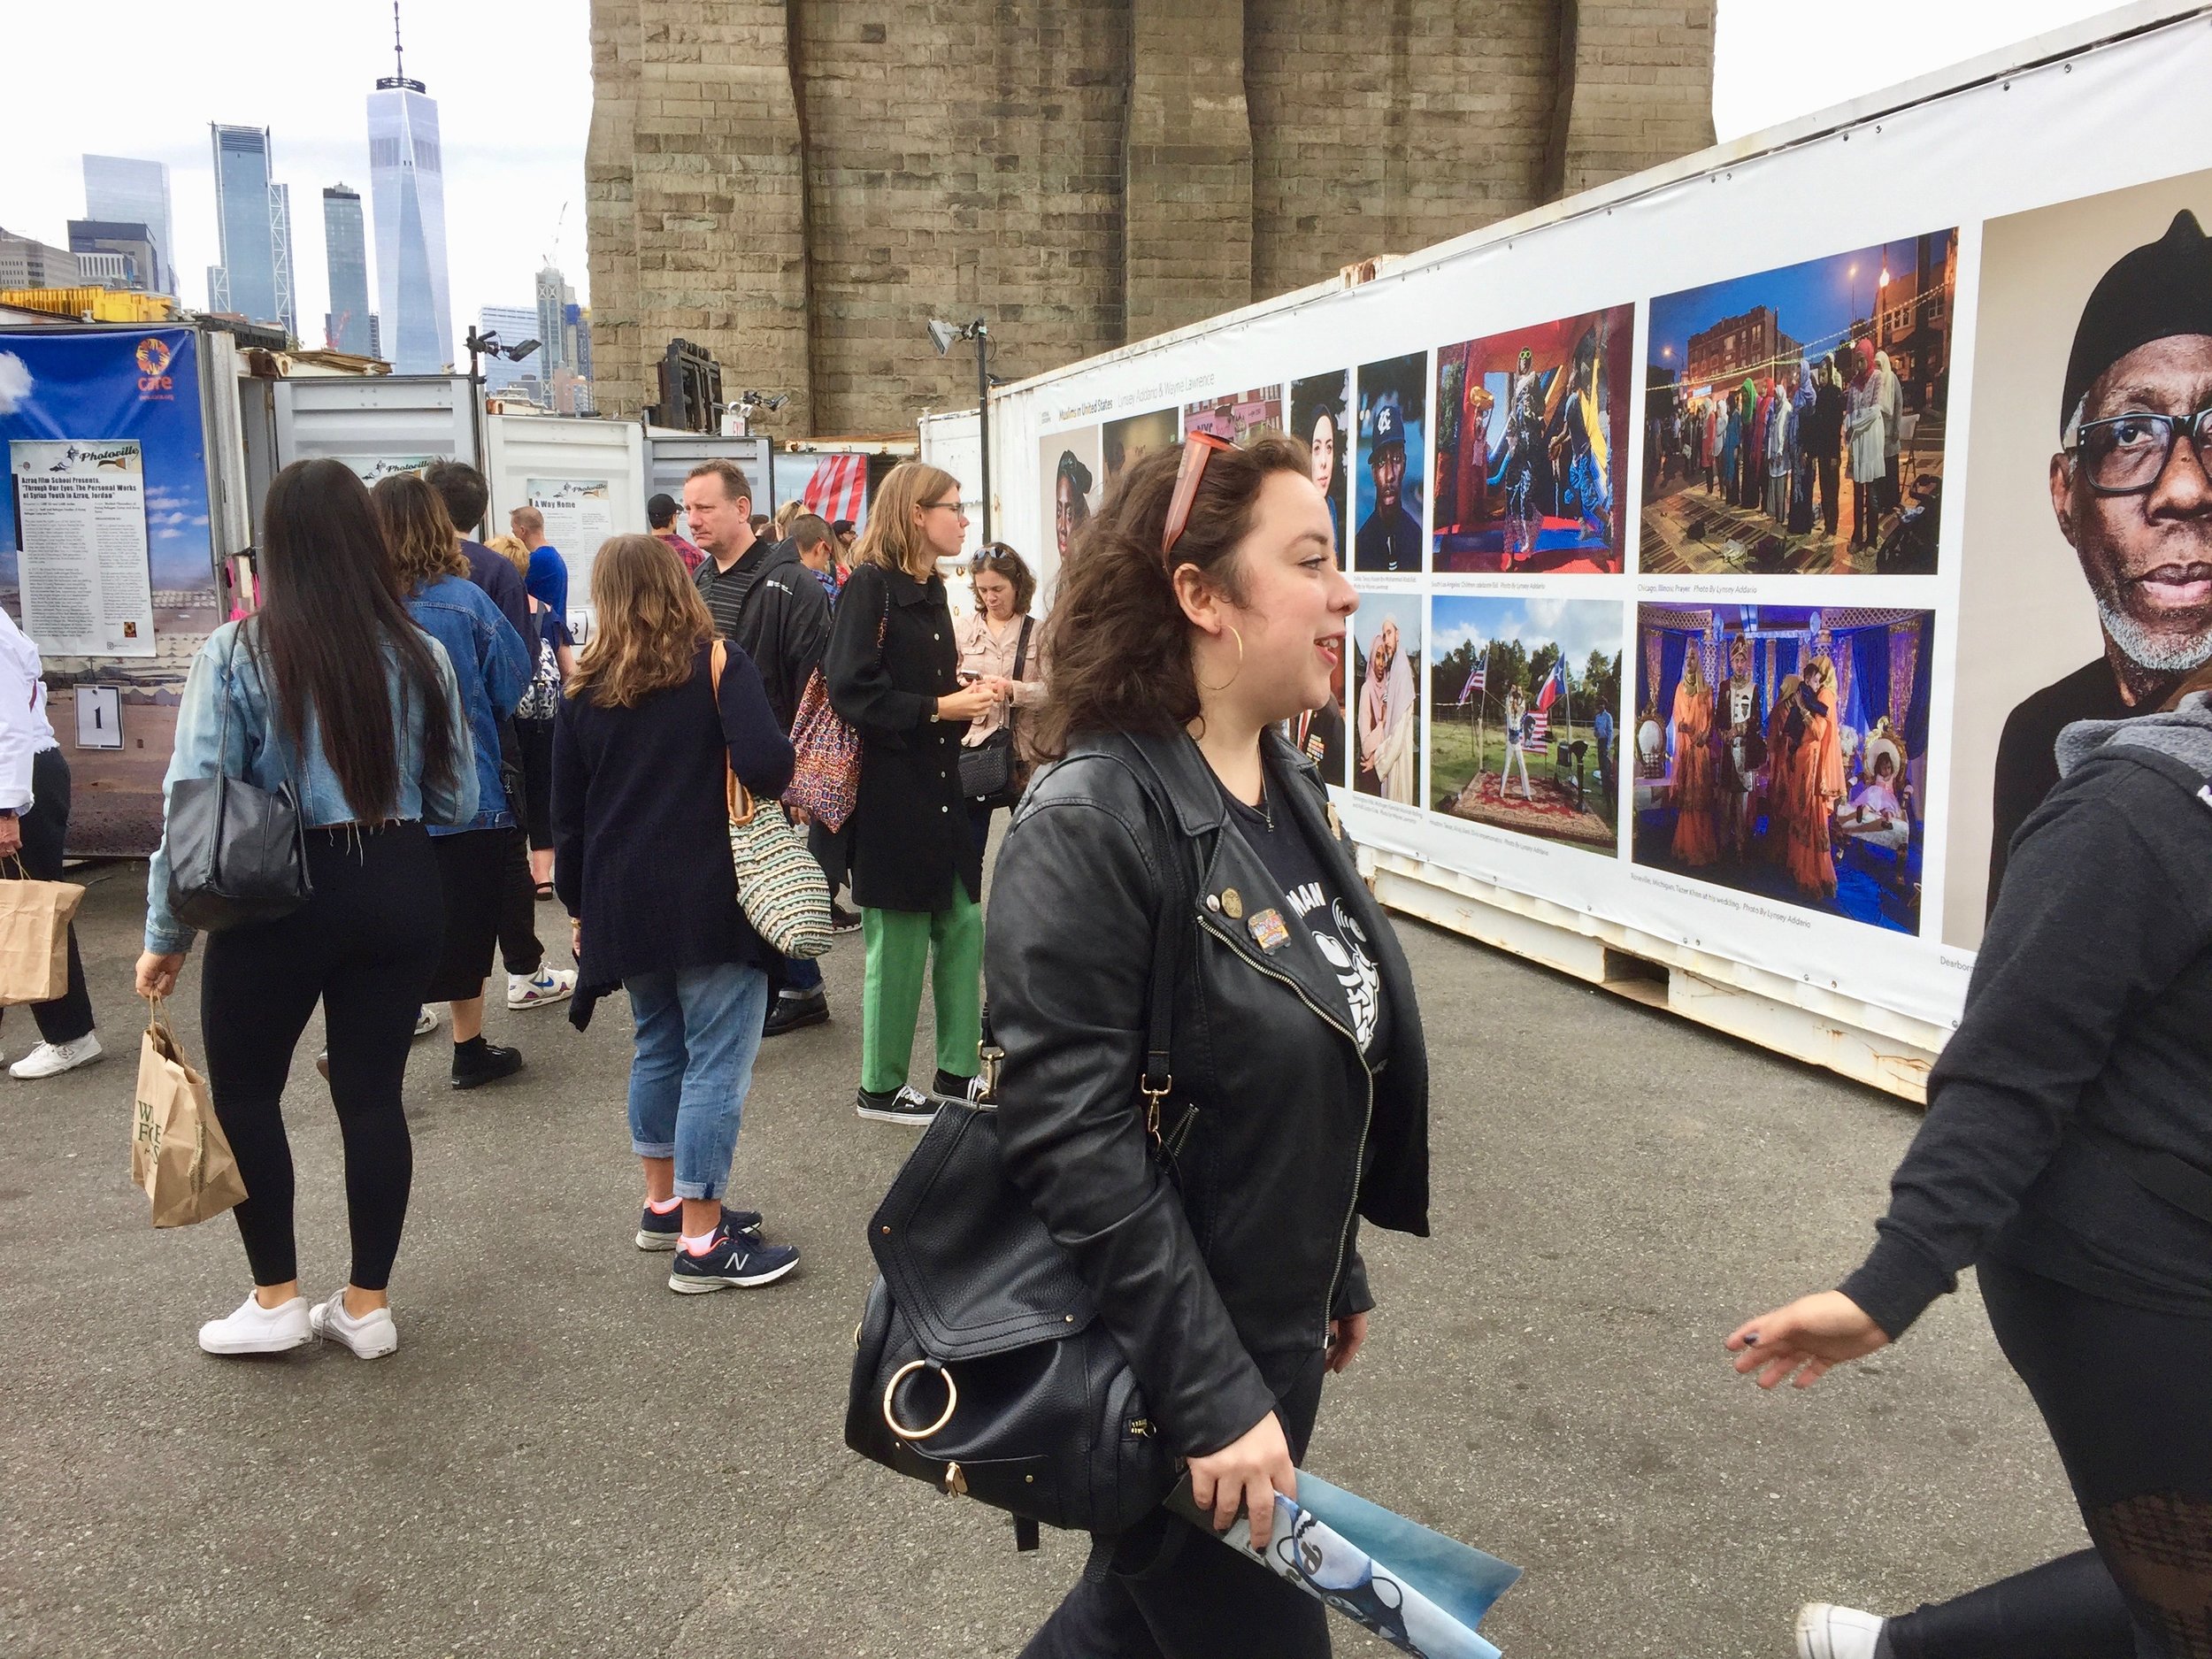  Photoville 2018. Amazing photography exhibit under an arch of the Brooklyn Bridge.  So DUMBO! 